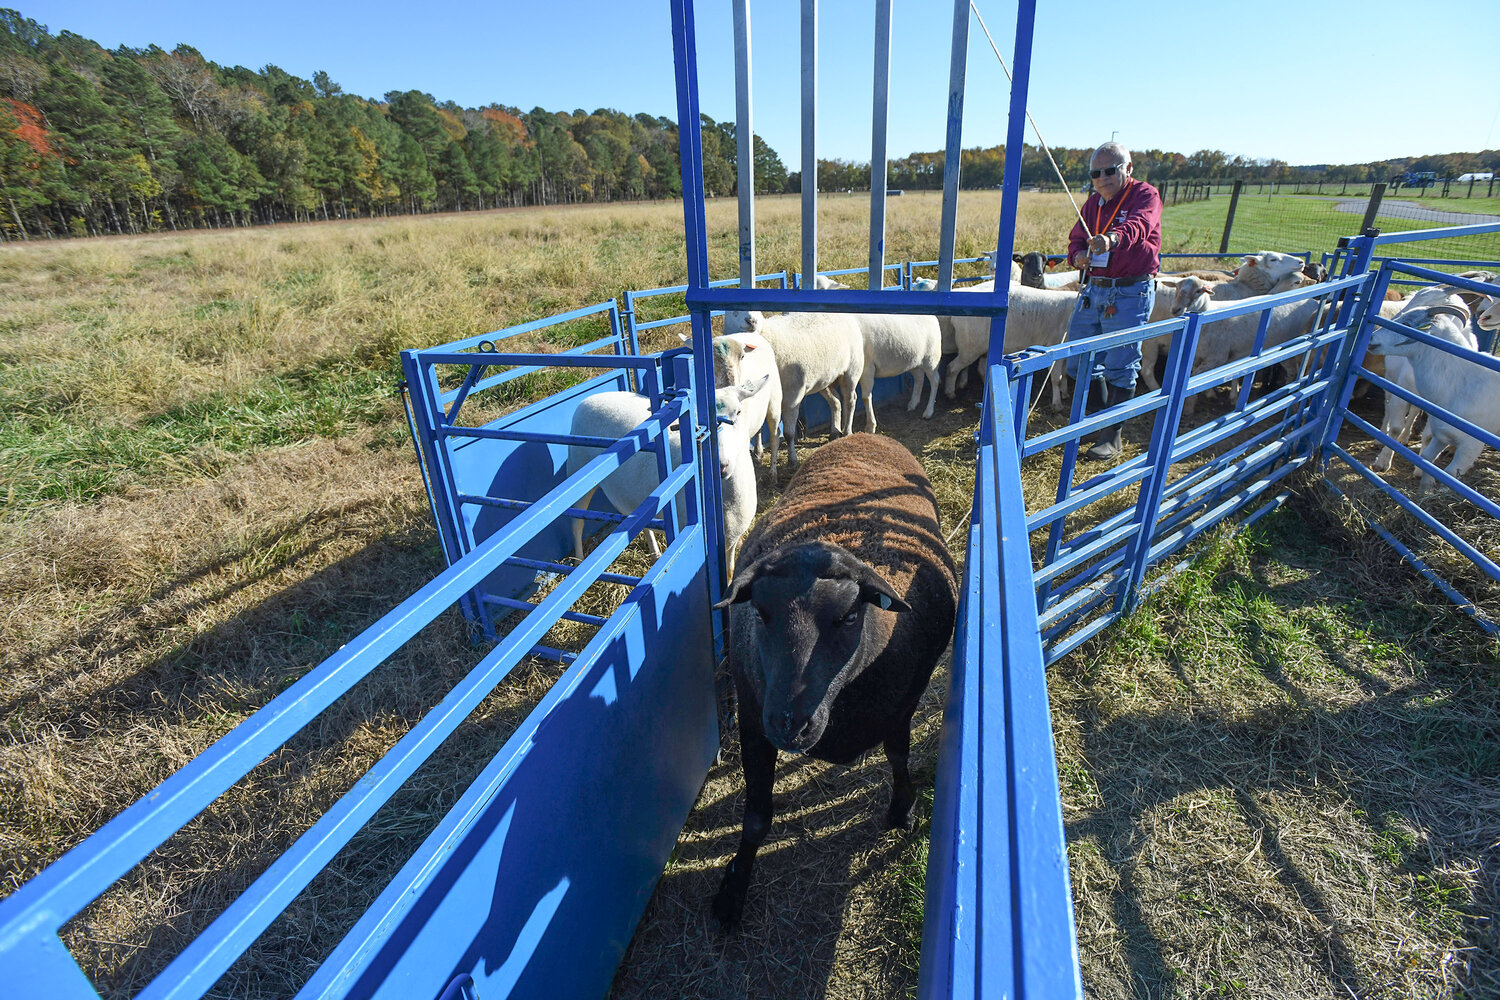 Dr. Enrique Nelson Escobar, an Extension Specialist in small ruminants, opens the chute to release sheep from their pen during the 2023 Small Farms Conference.